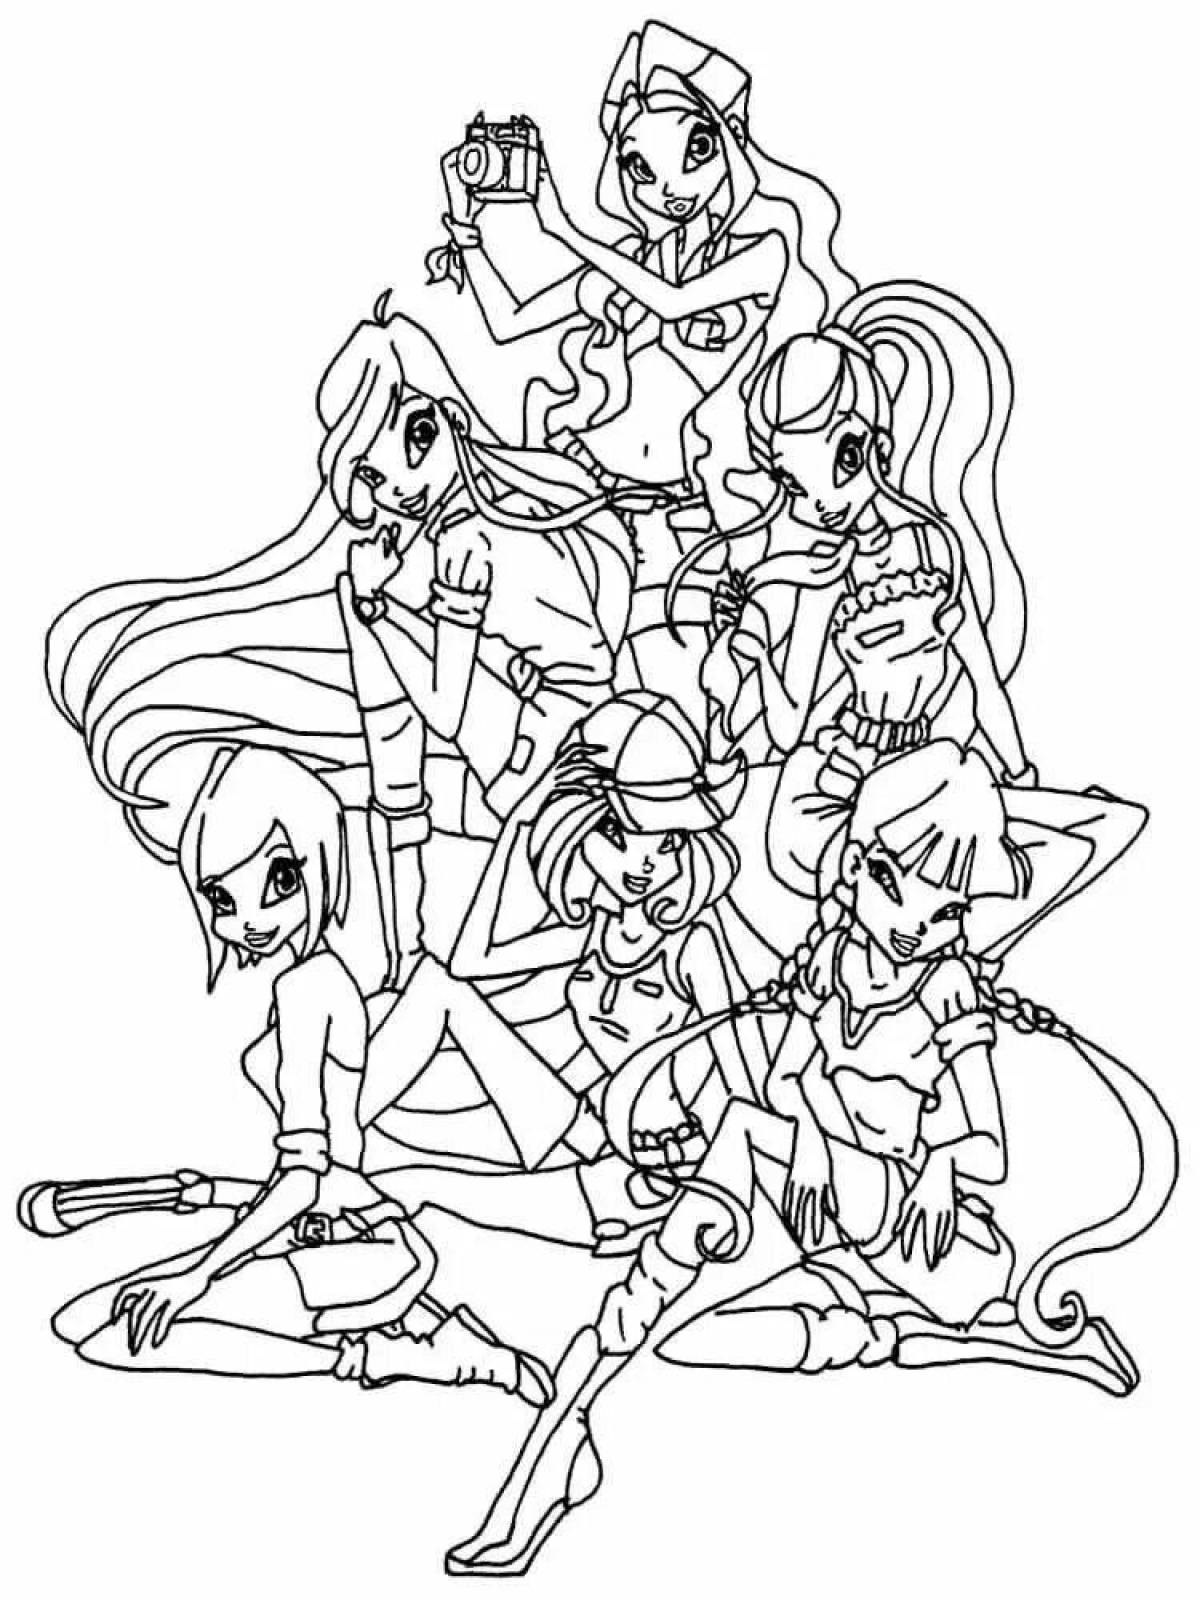 Winx pictures awesome coloring pages